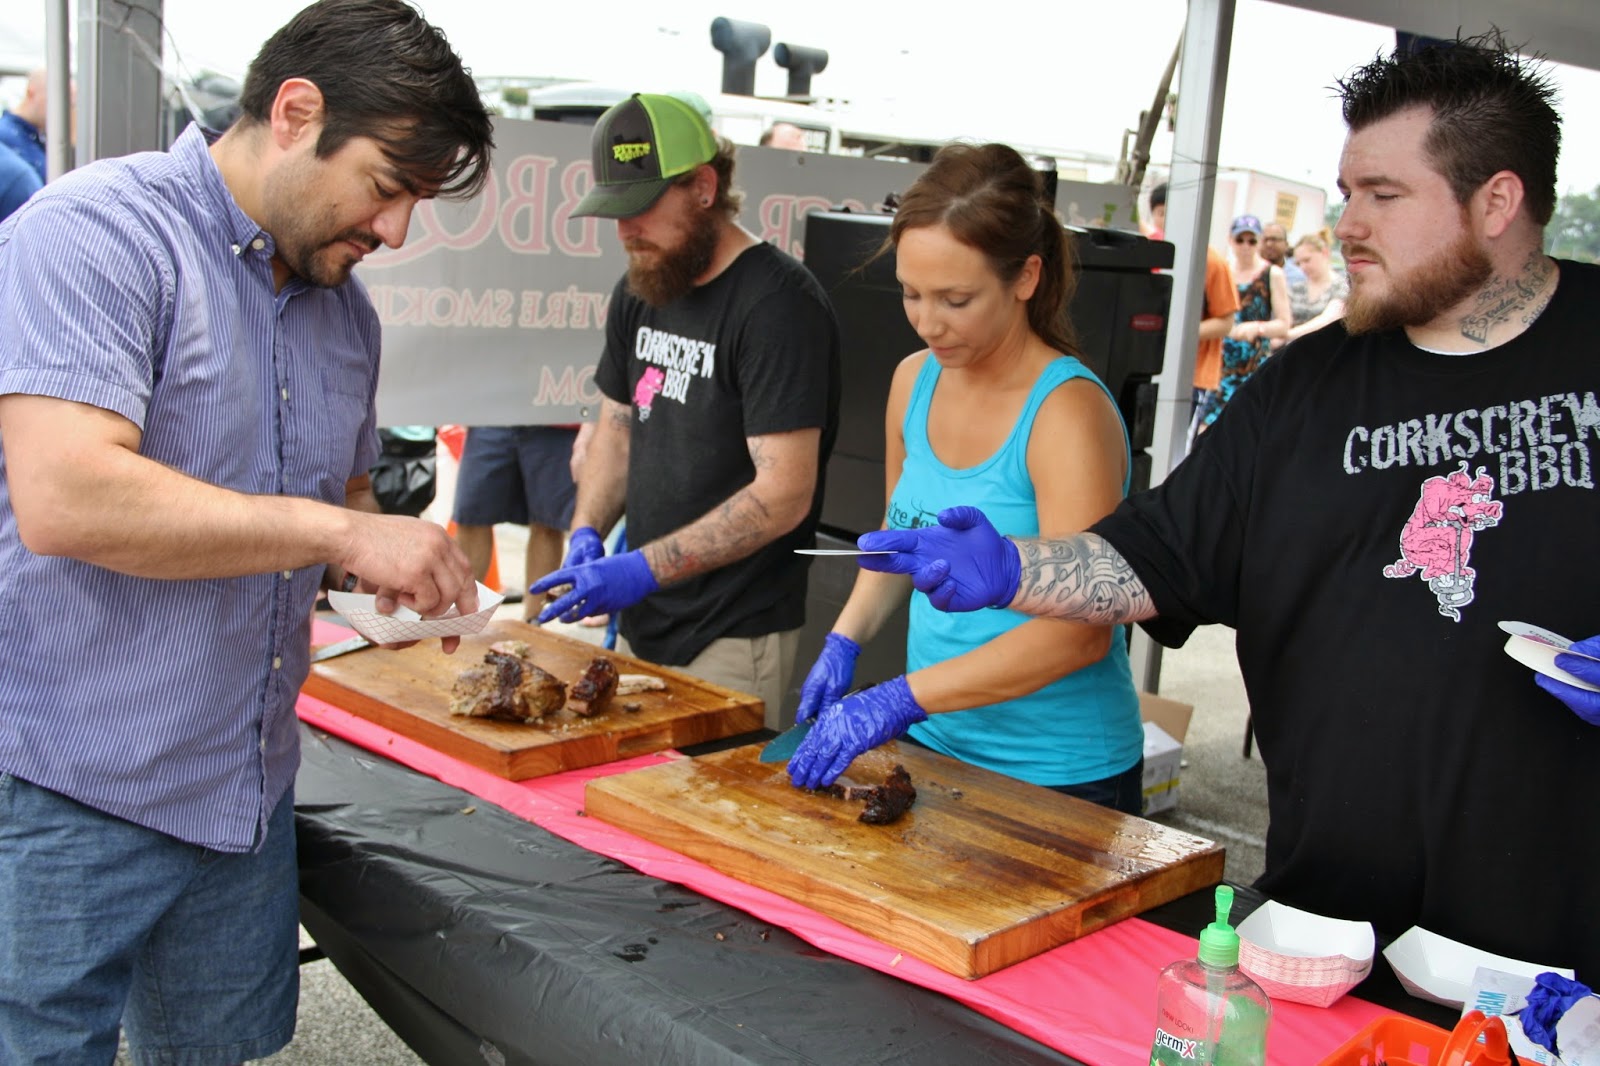 Slicing meats at the Corkscrew BBQ booth.